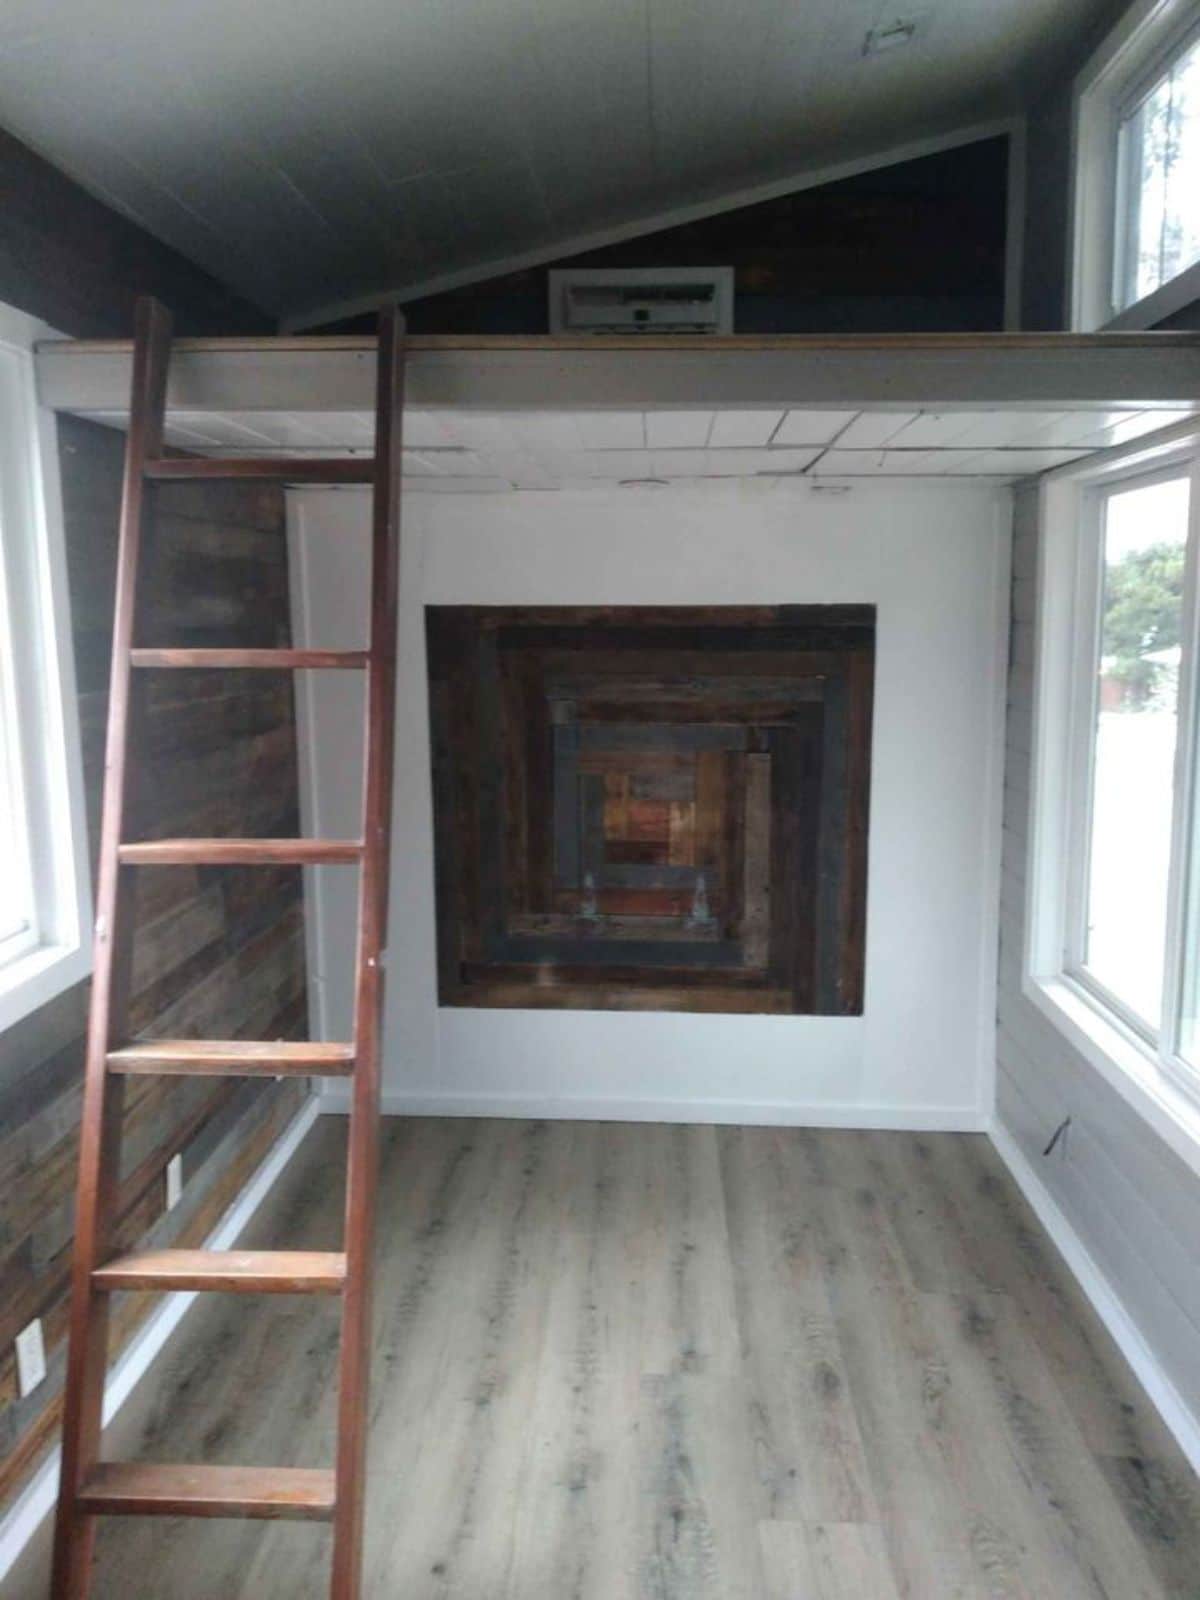 ladder to loft on left of image with reclaimed wood block beneath loft against white wall